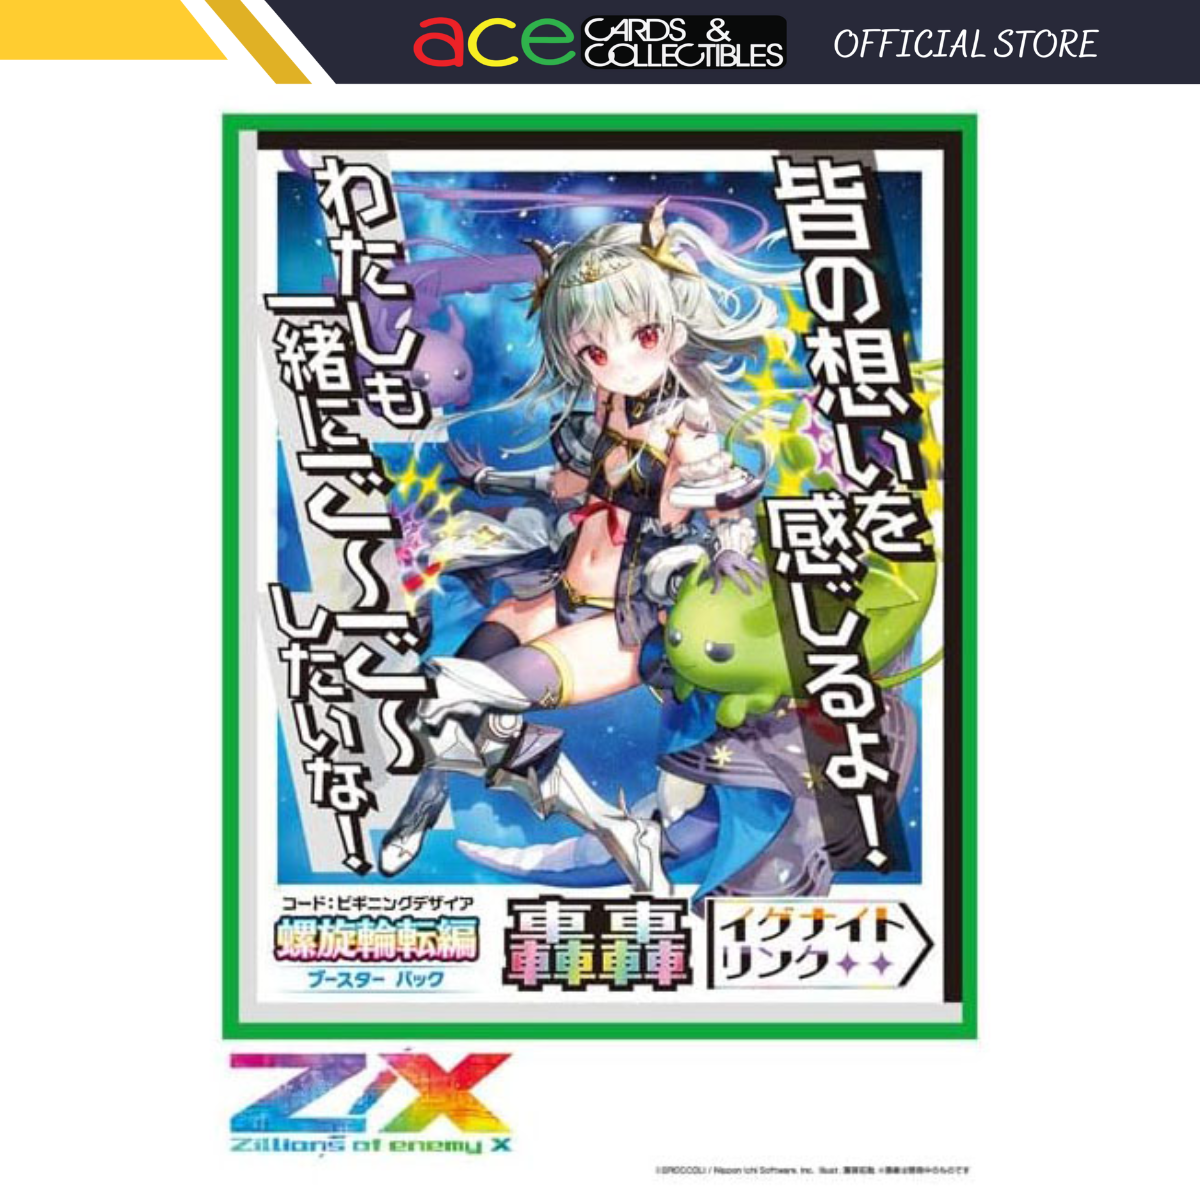 Z/X -Zillions of enemy X- Beginning Desire "GouGou" Ignite Link [ZX-B-47] (Japanese)-EX Pack (Random)-Broccoli-Ace Cards & Collectibles